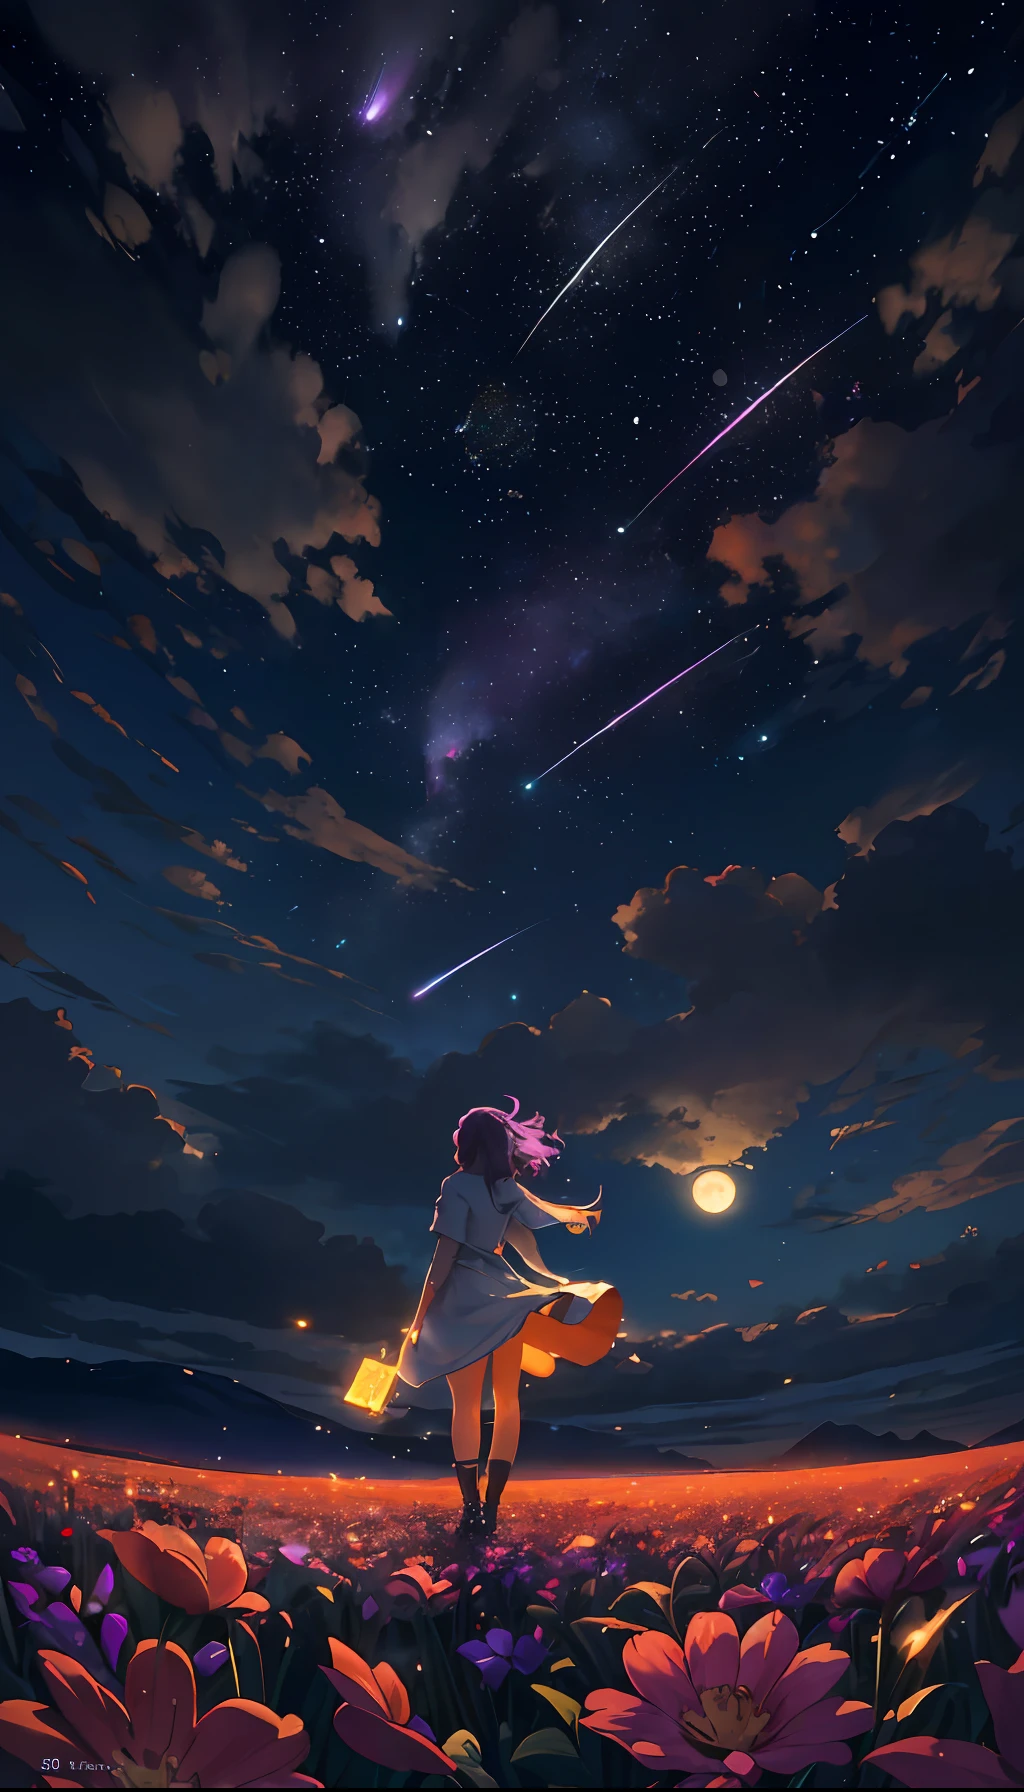 Vast landscape photo, (viewed from below, the sky is above and the open field is below), a girl standing on a flower field looking up, (full moon: 1.2), (meteor: 0.9), (nebula: 1.3), distant mountains , Trees BREAK Crafting Art, (Warm Light: 1.2), (Fireflies: 1.2), Lights, Lots of Purple and Orange, Intricate Details, Volumetric Lighting, Realism BREAK (Masterpiece: 1.2), (Best Quality), 4k, Ultra-Detailed, (Dynamic Composition: 1.4), Very Detailed, Colorful Details, (Rainbow Colors: 1.2), (Glow Lighting, Atmospheric Lighting), Dreamy, Magical, (Solo: 1.2)